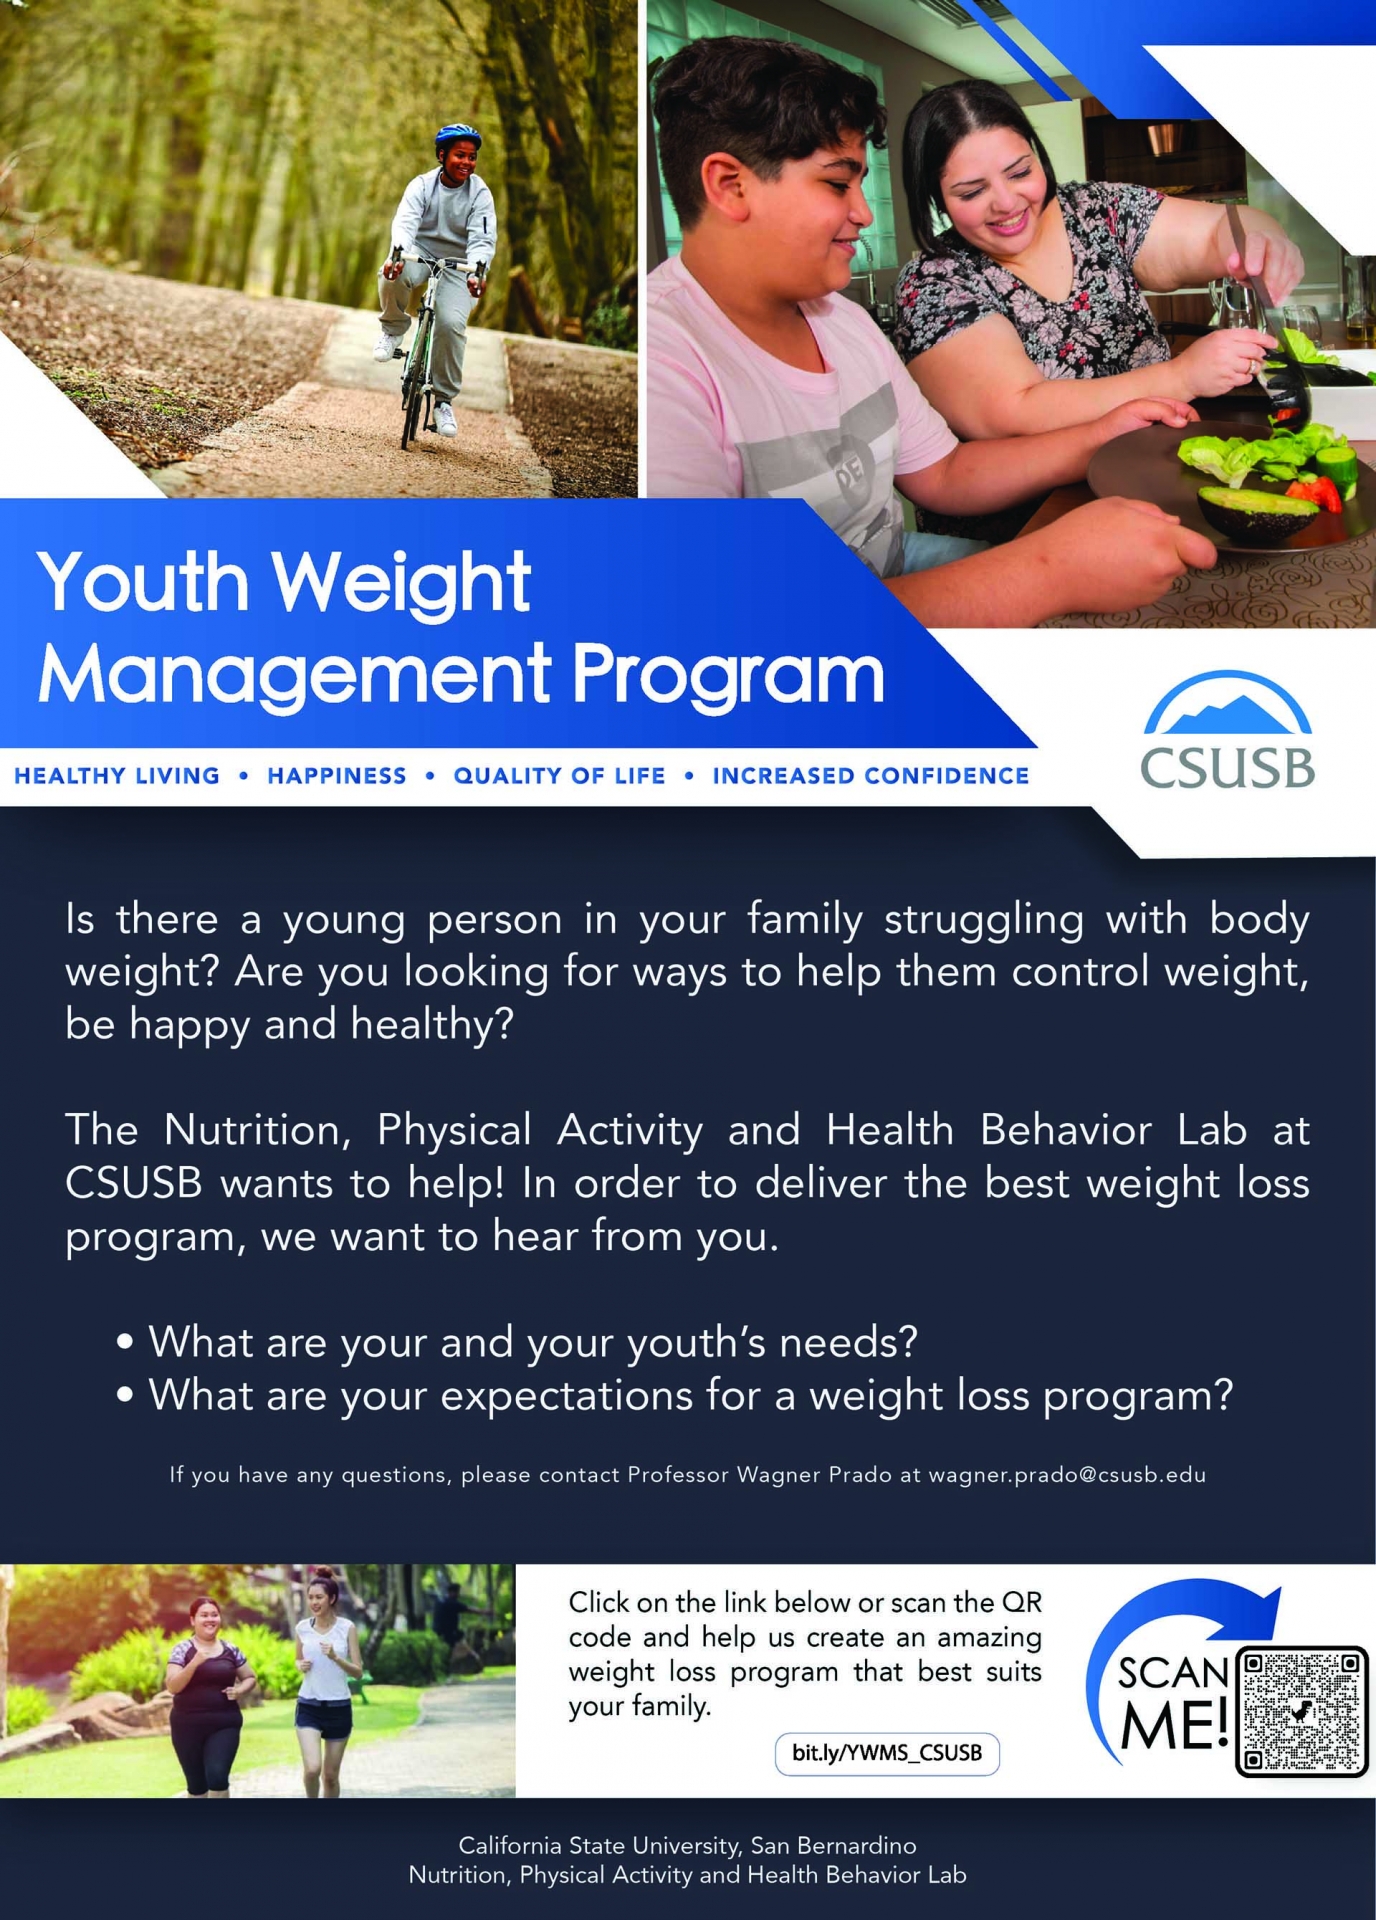 Youth Weight Management Program flyer 